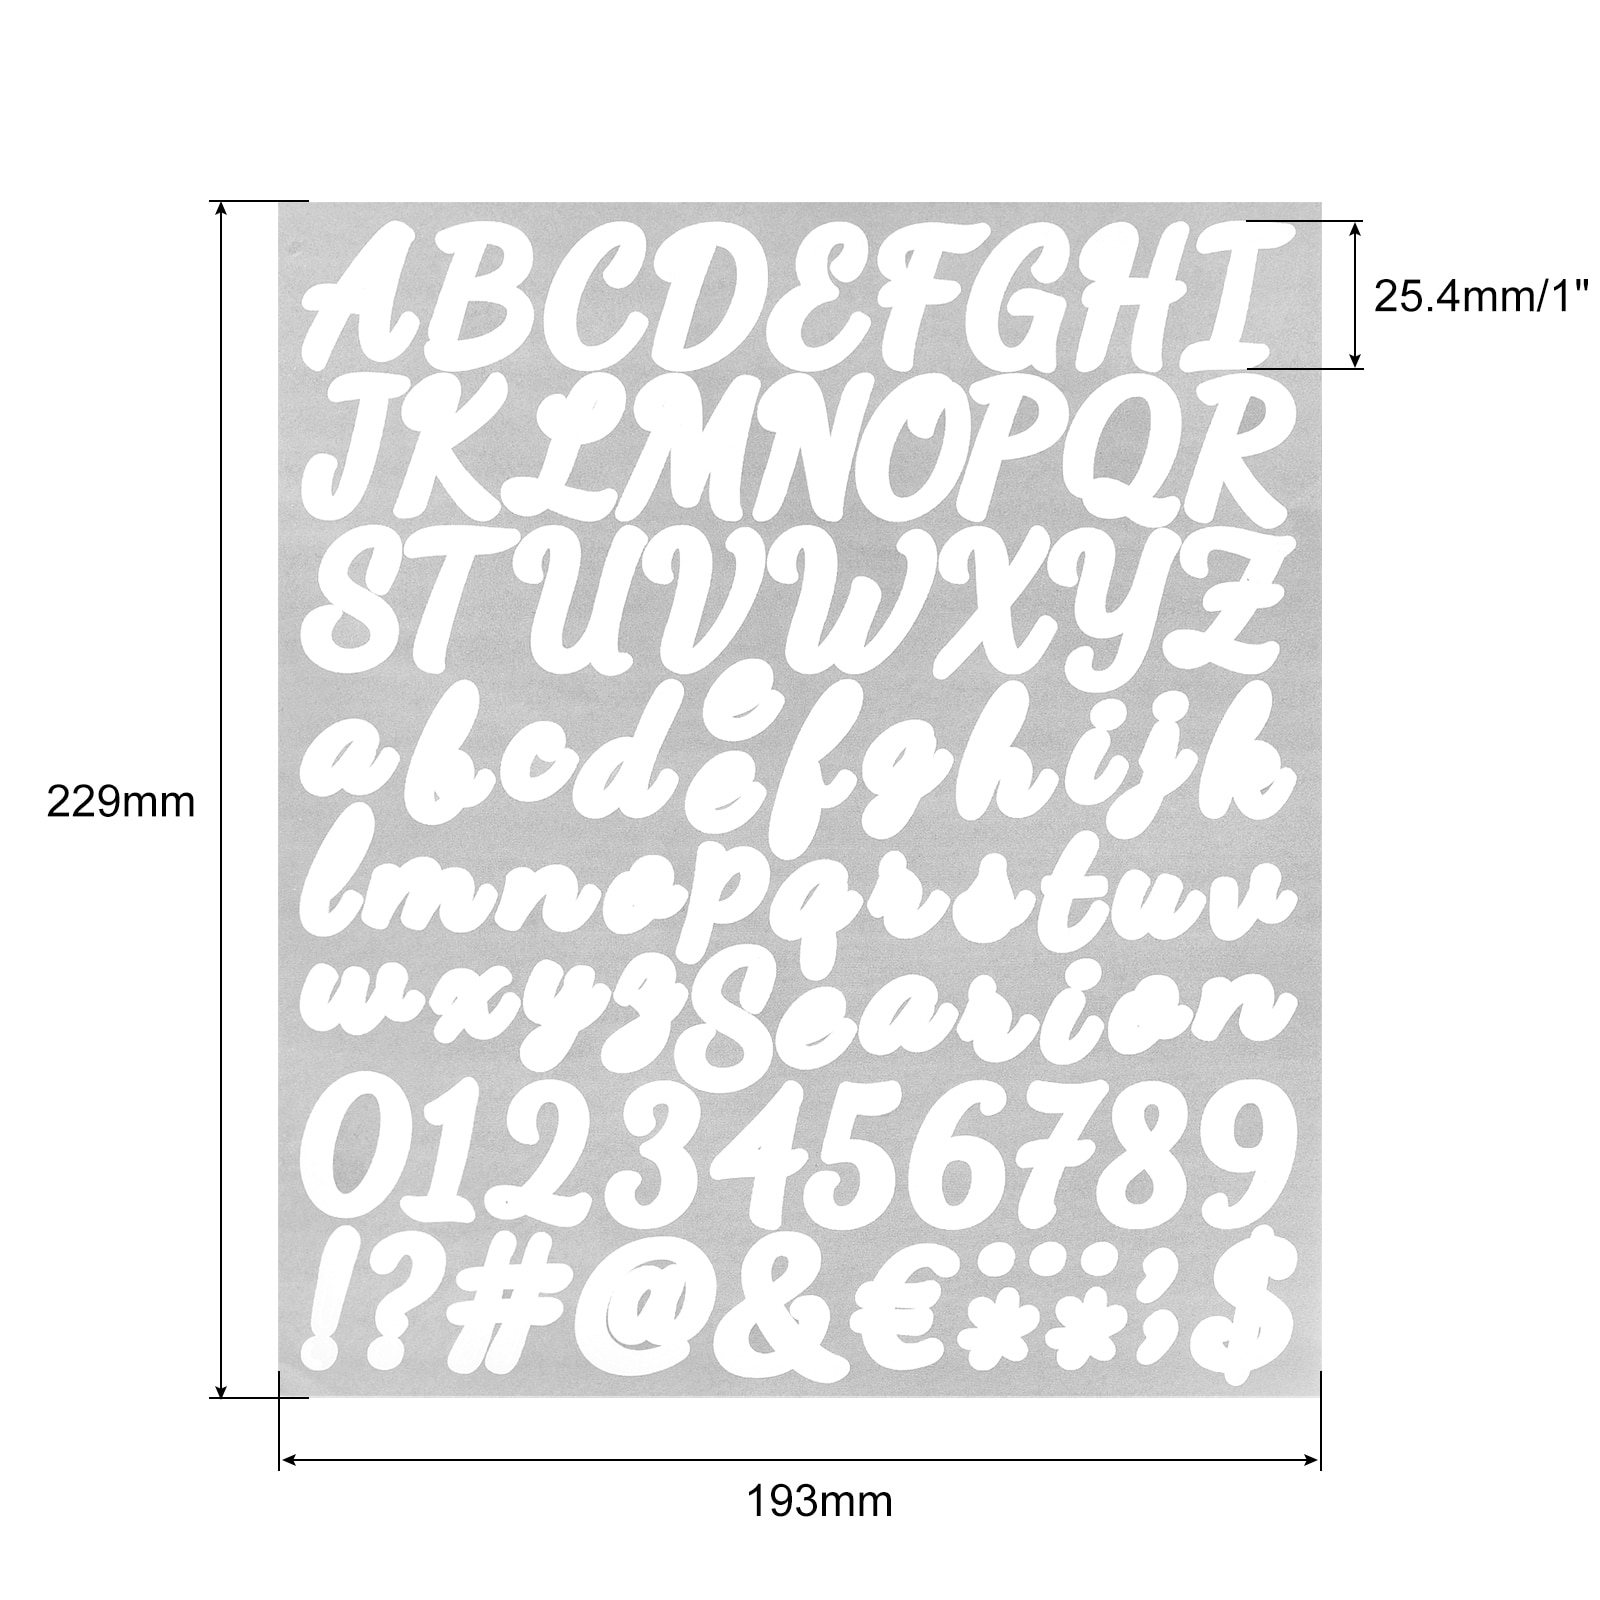 Self Adhesive Vinyl Letter Alphabet Number Stickers,Black 1 76  Count/Sheet,8 Pack